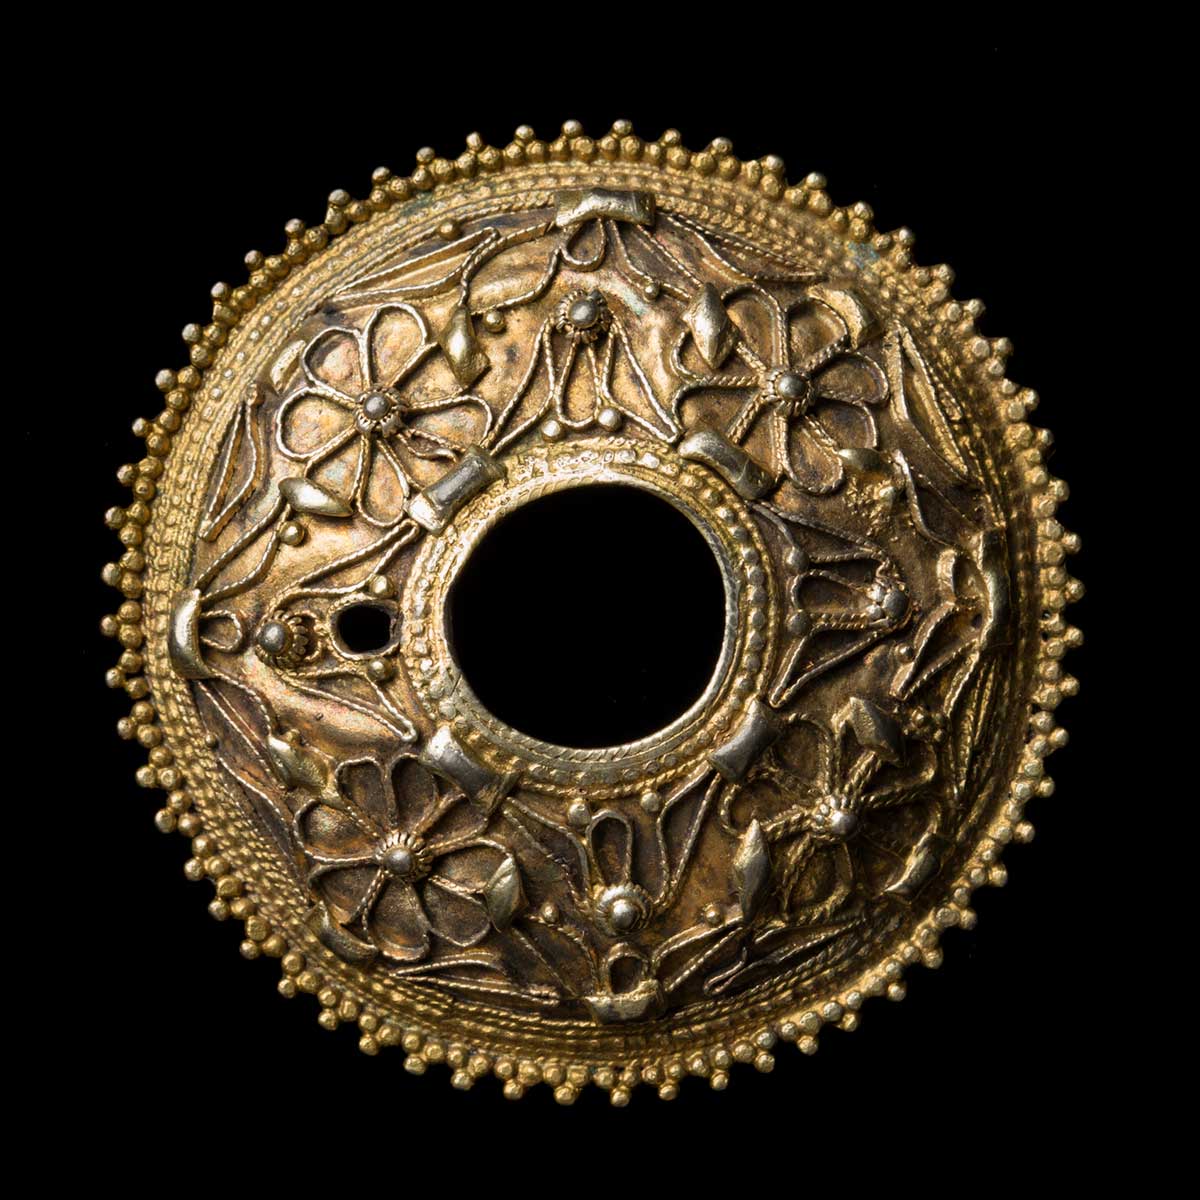 A gold-coloured round button brooch. The exterior edge has intricate beaded details, and the interior edge is decorated with a thin gold-coloured band. The face of the button brooch is decorated with gold-coloured wire details in floral shapes. - click to view larger image